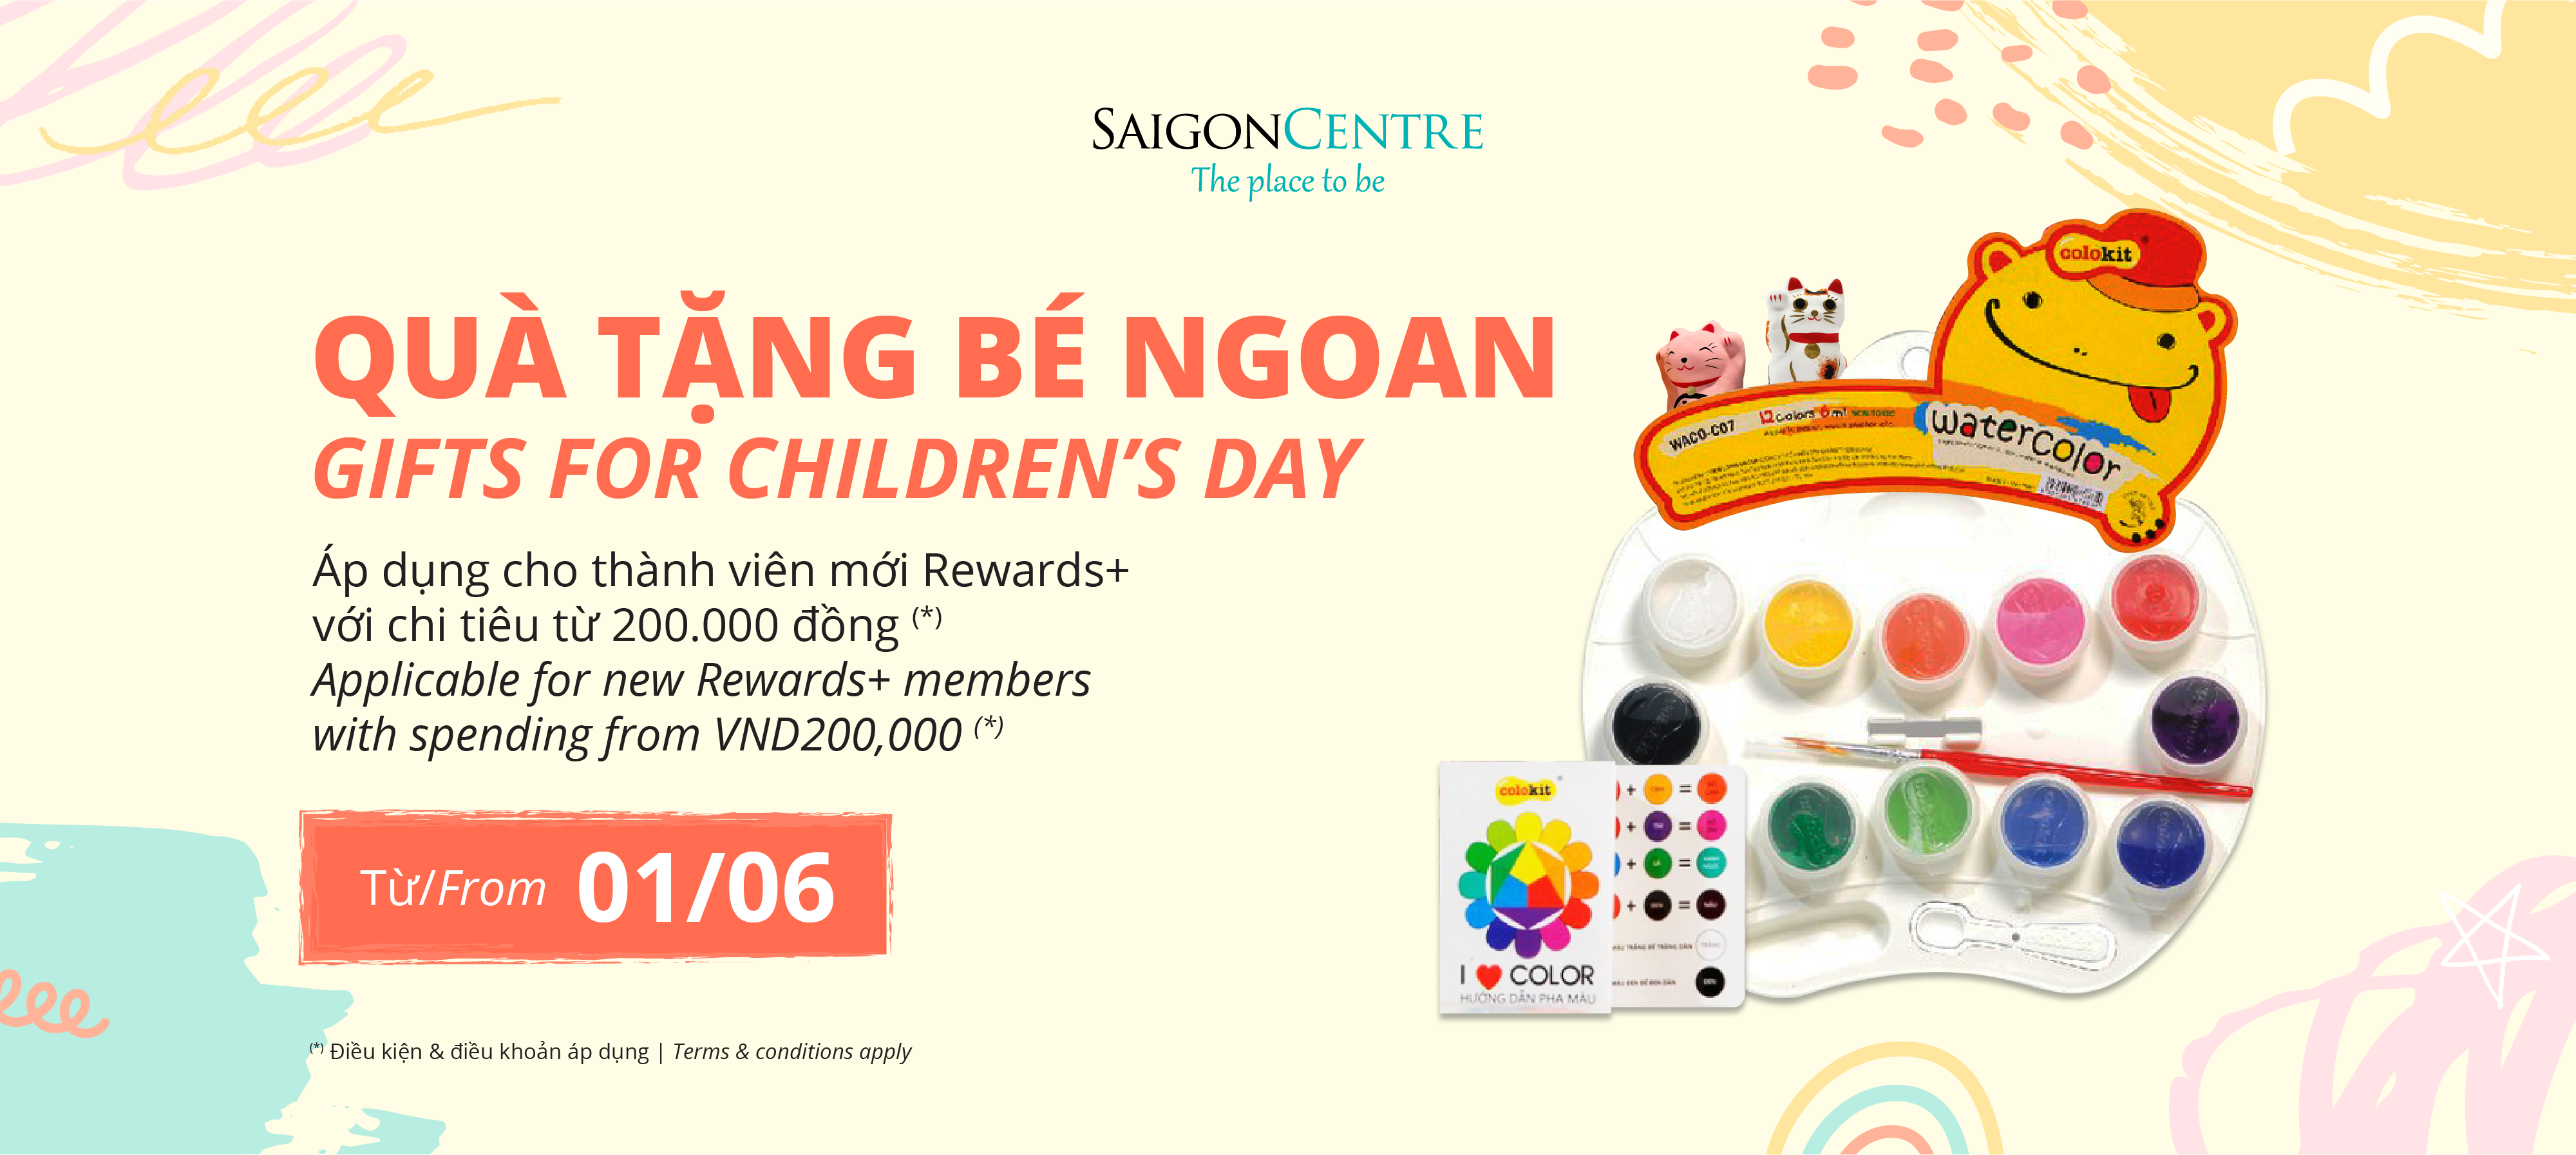 GIFTS FOR CHILDREN'S DAY